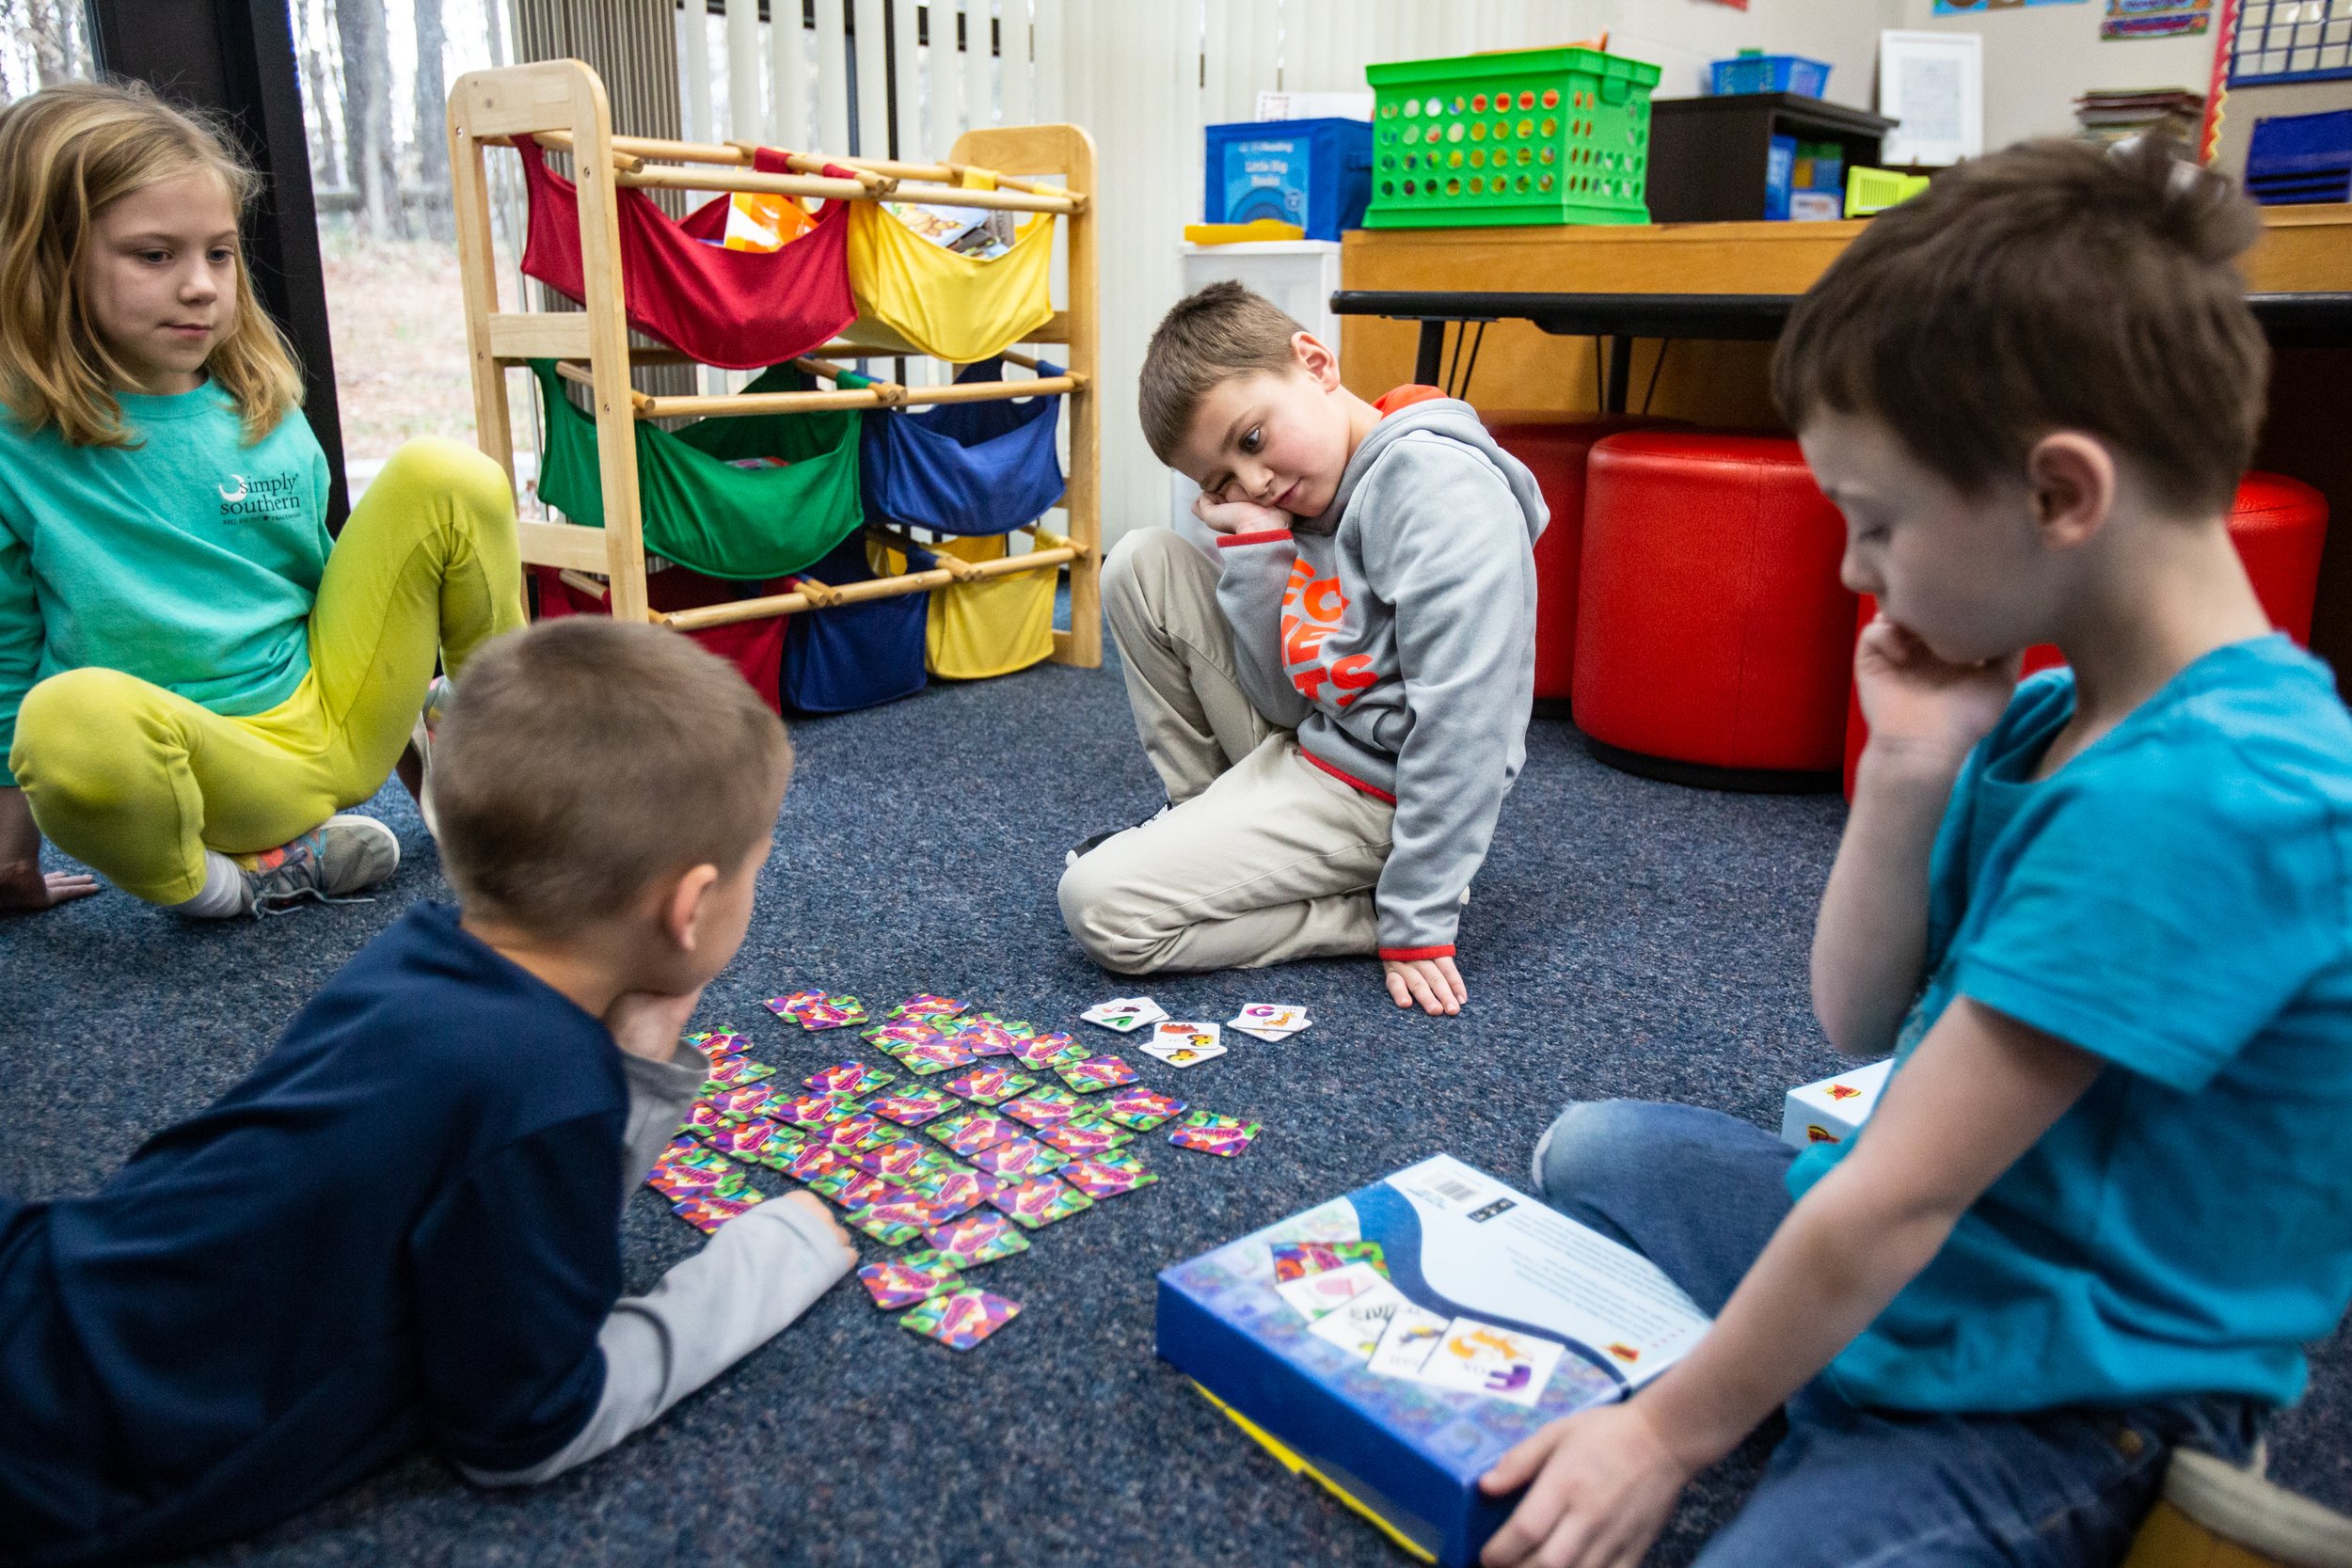  Cale Rohleder, left, Hallie Nordhoff, Grady Breitwieser and Derick Birk play a memory game at Pine Ridge Elementary School on Wednesday, Feb. 12 2020. 